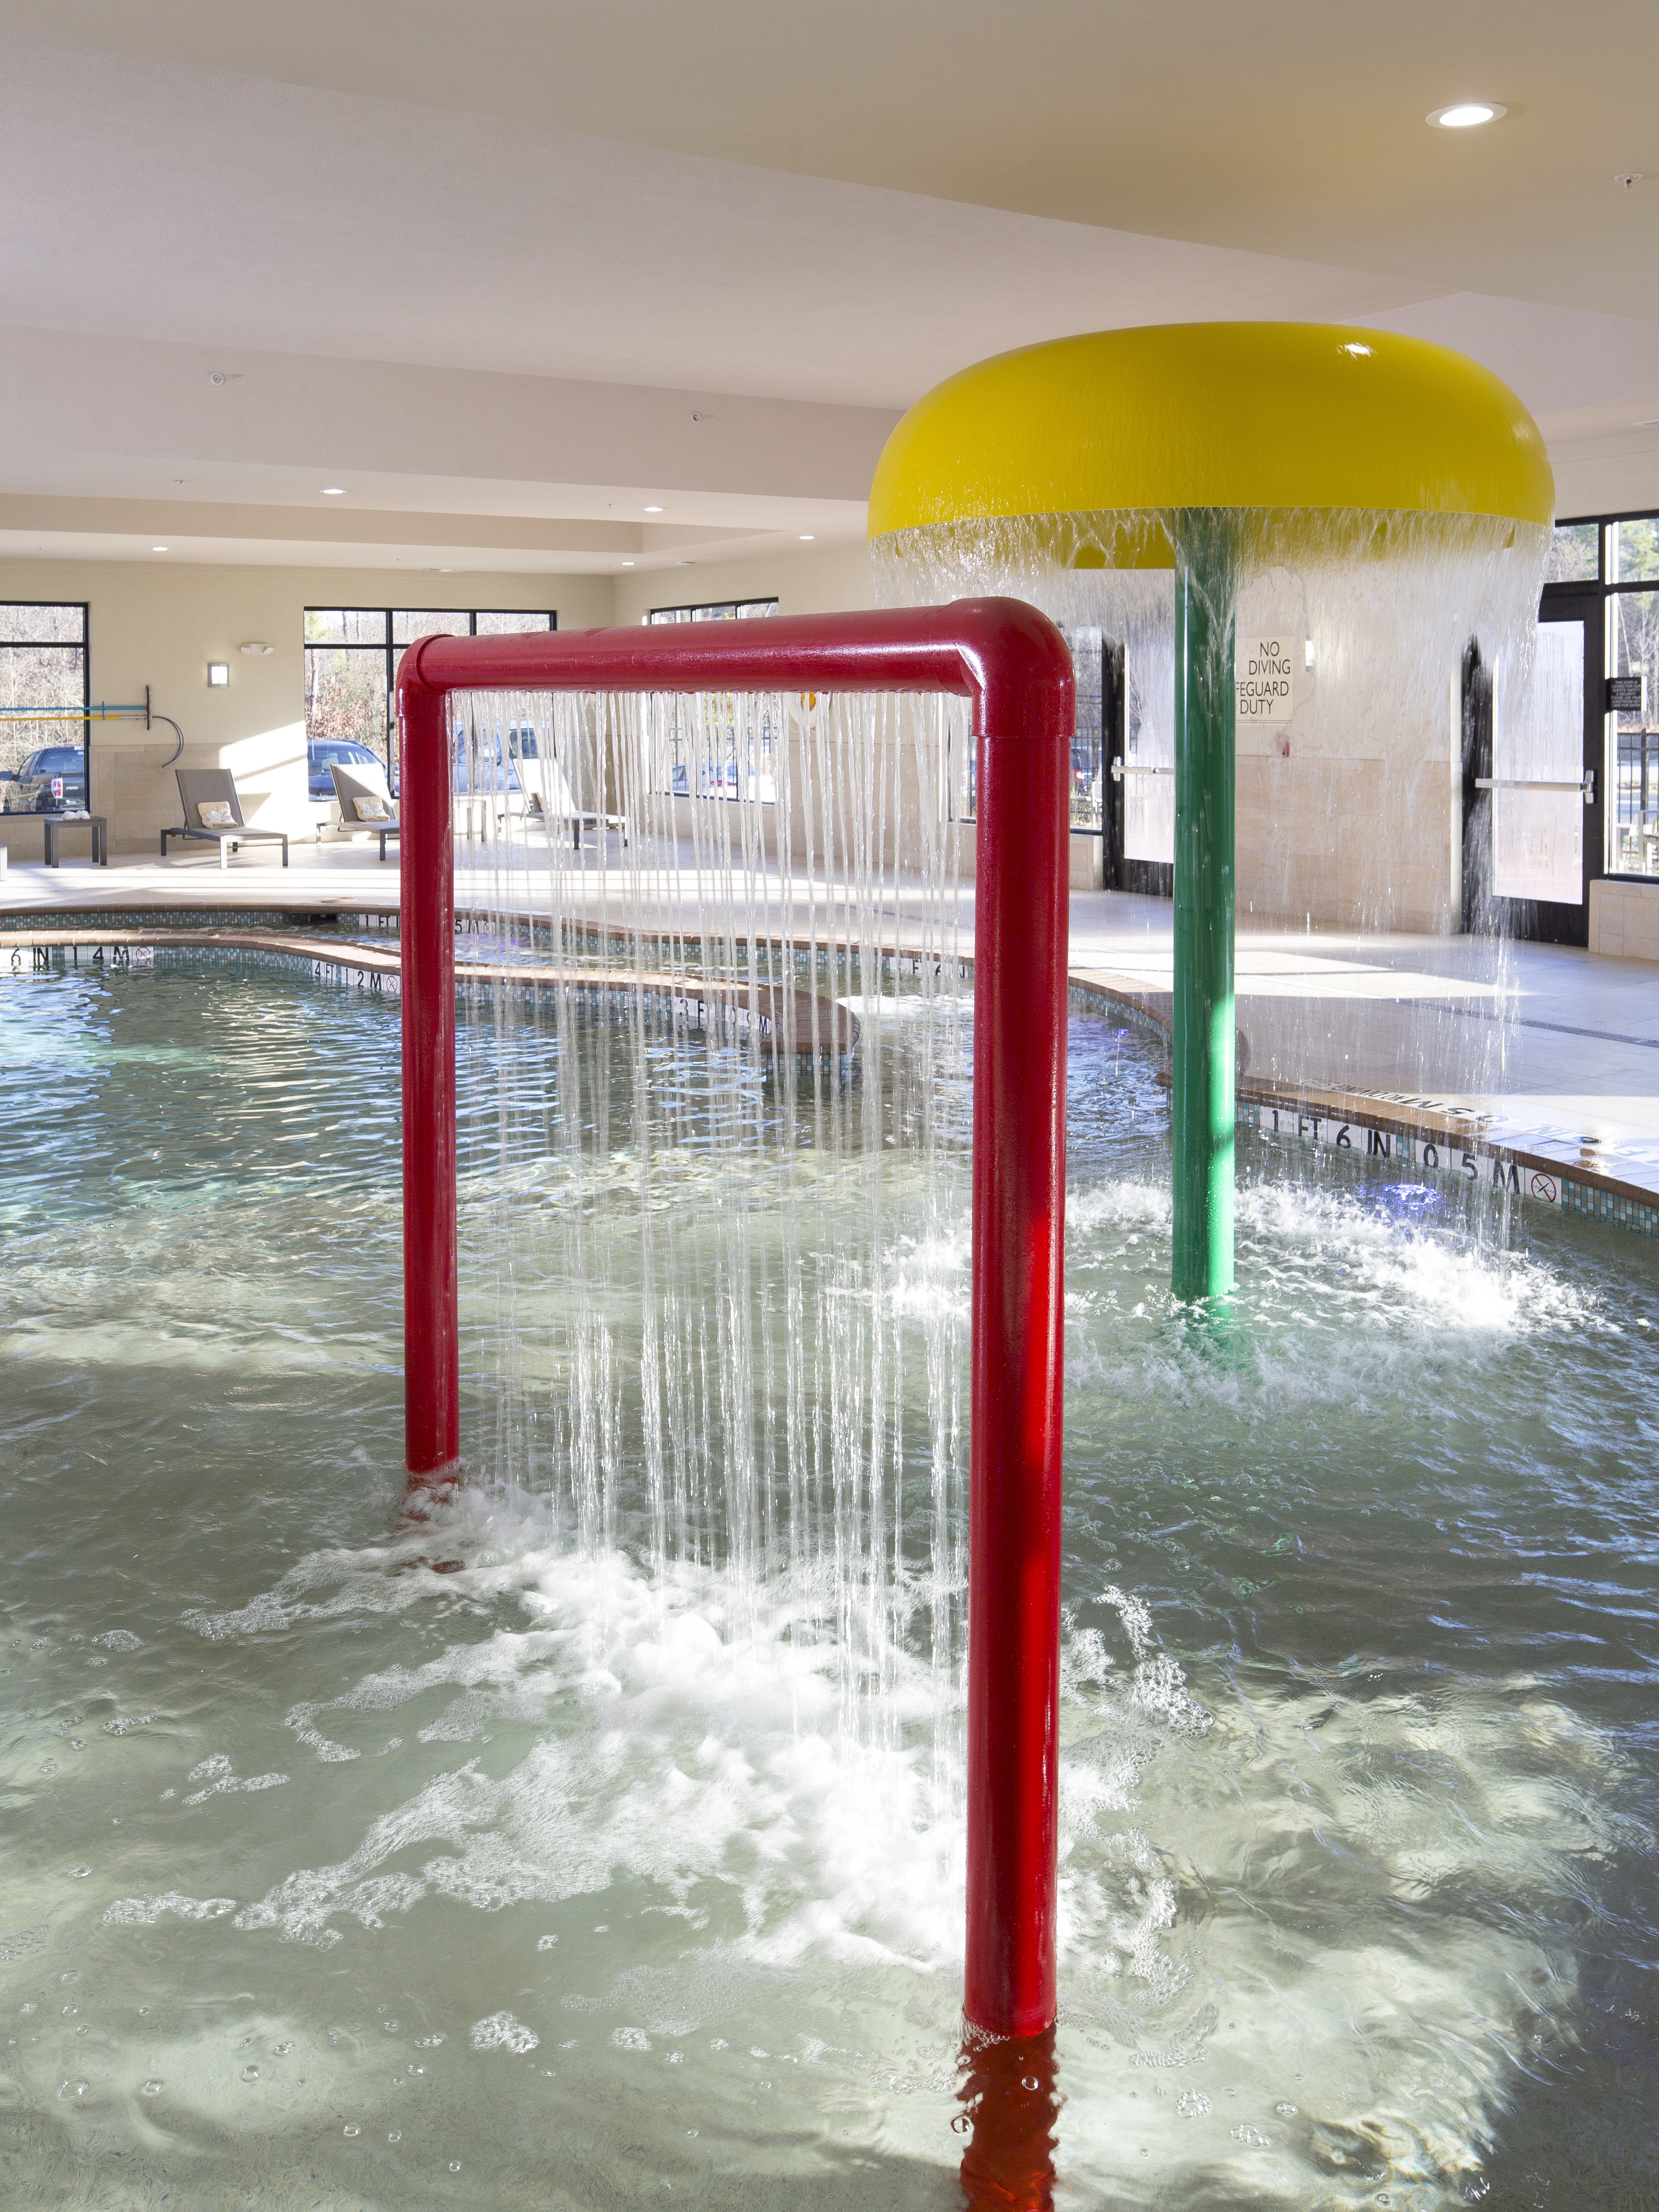 Indoor pool at hotel with water features.